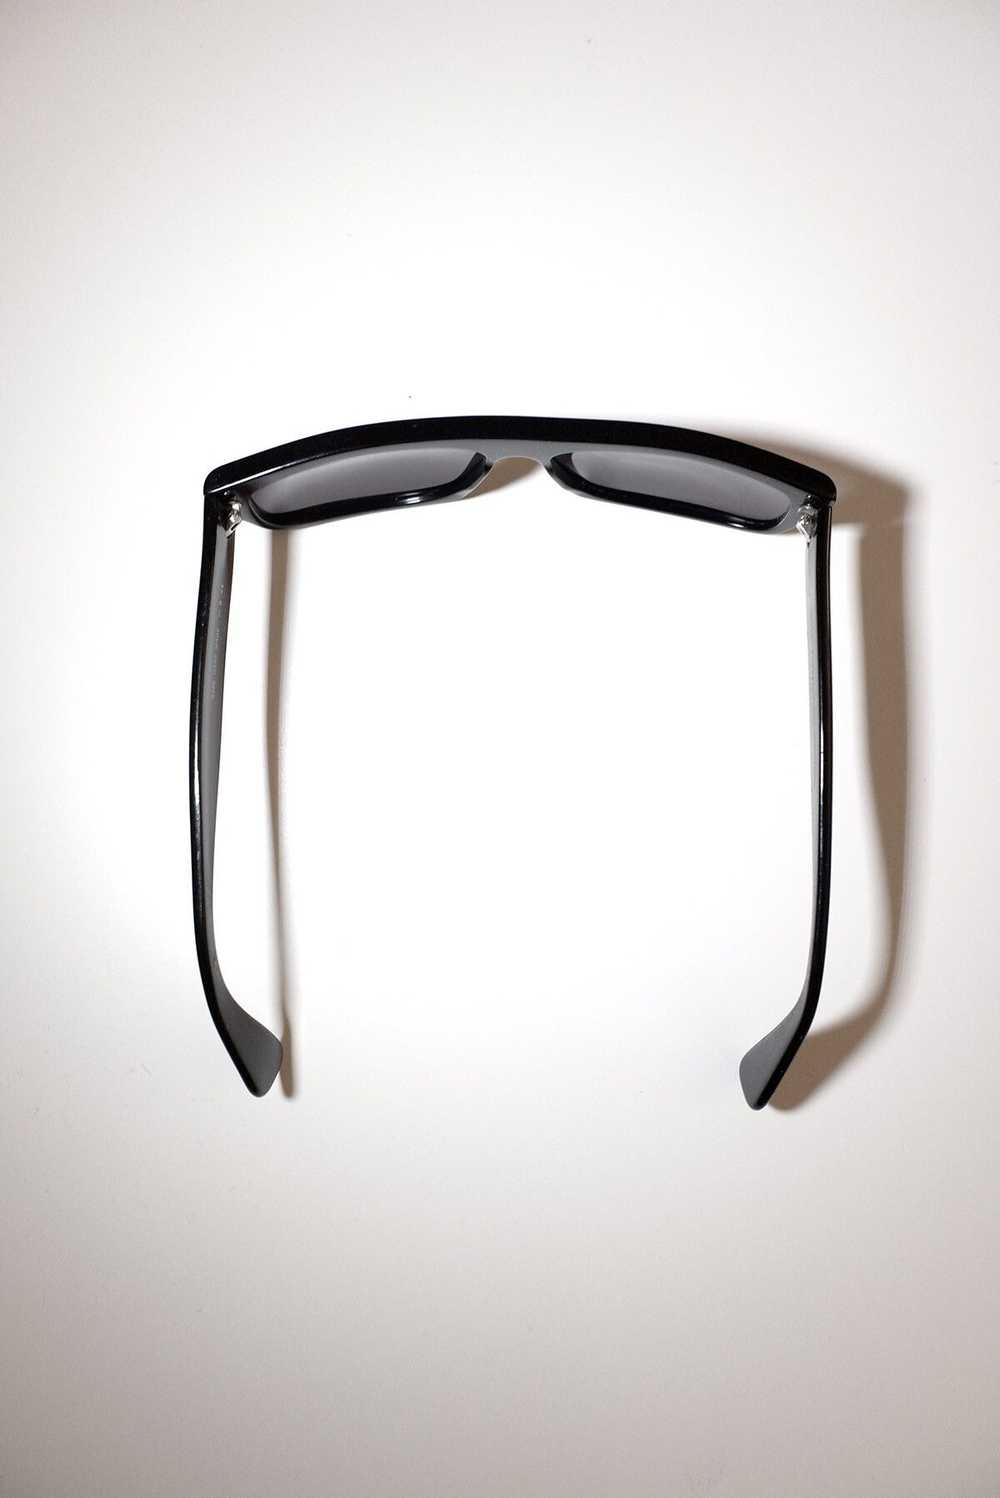 Cutler And Gross Vintage 80's / 90's Sunglasses - image 4